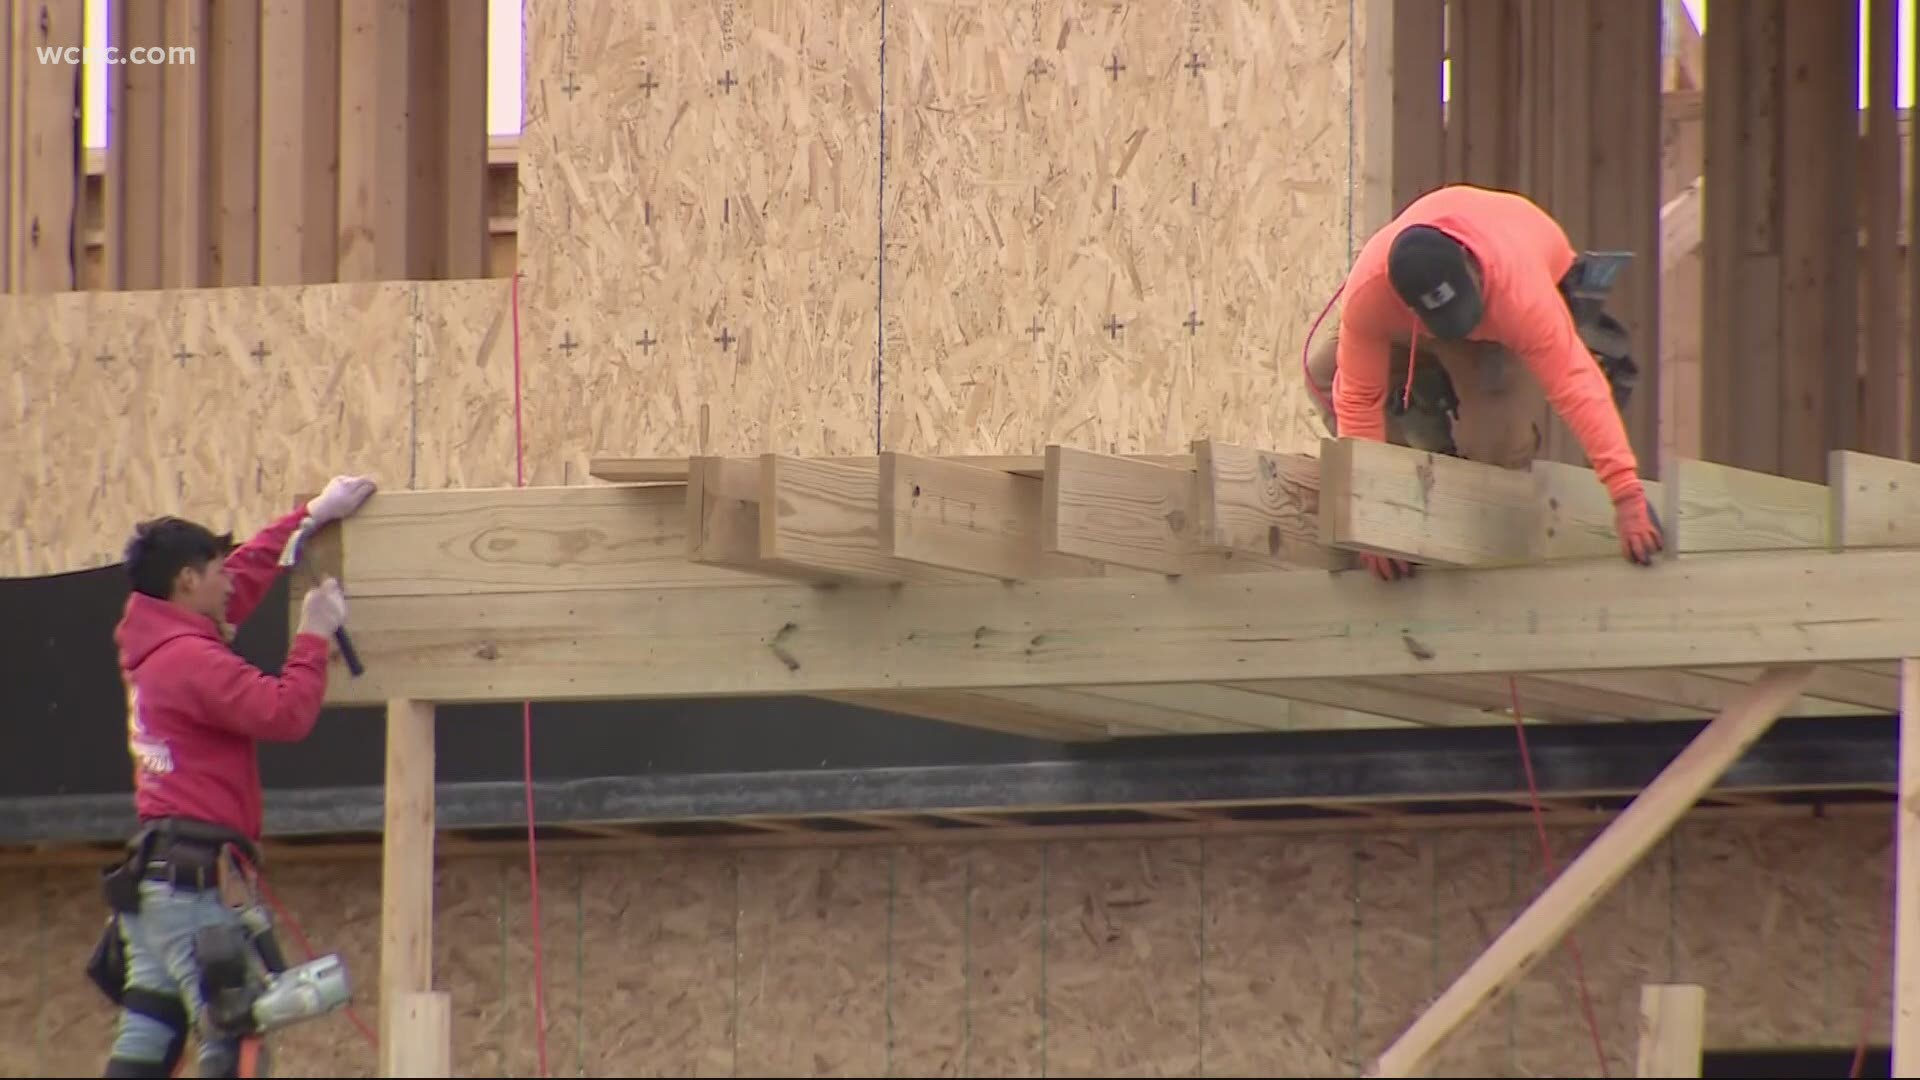 You don't have to be buying a home to get hit with the high lumber prices -- the do-it-yourself projects are likely adding up too.